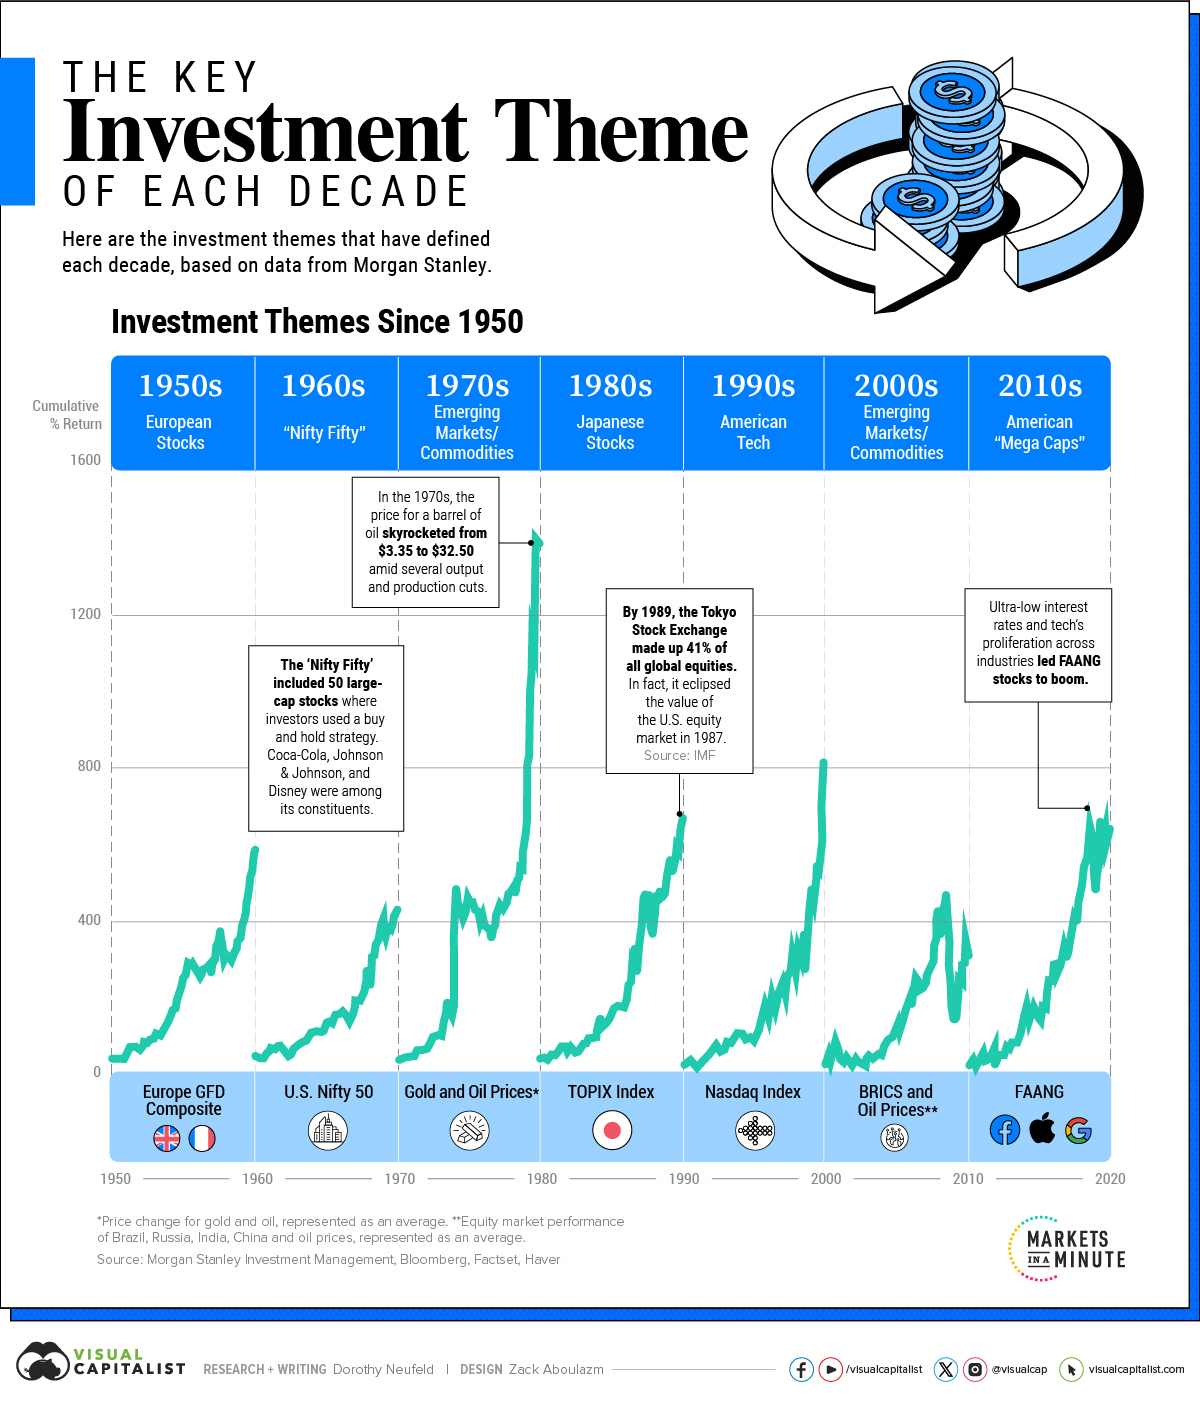 The Key Investment Theme of Each Decade (1950-Today)